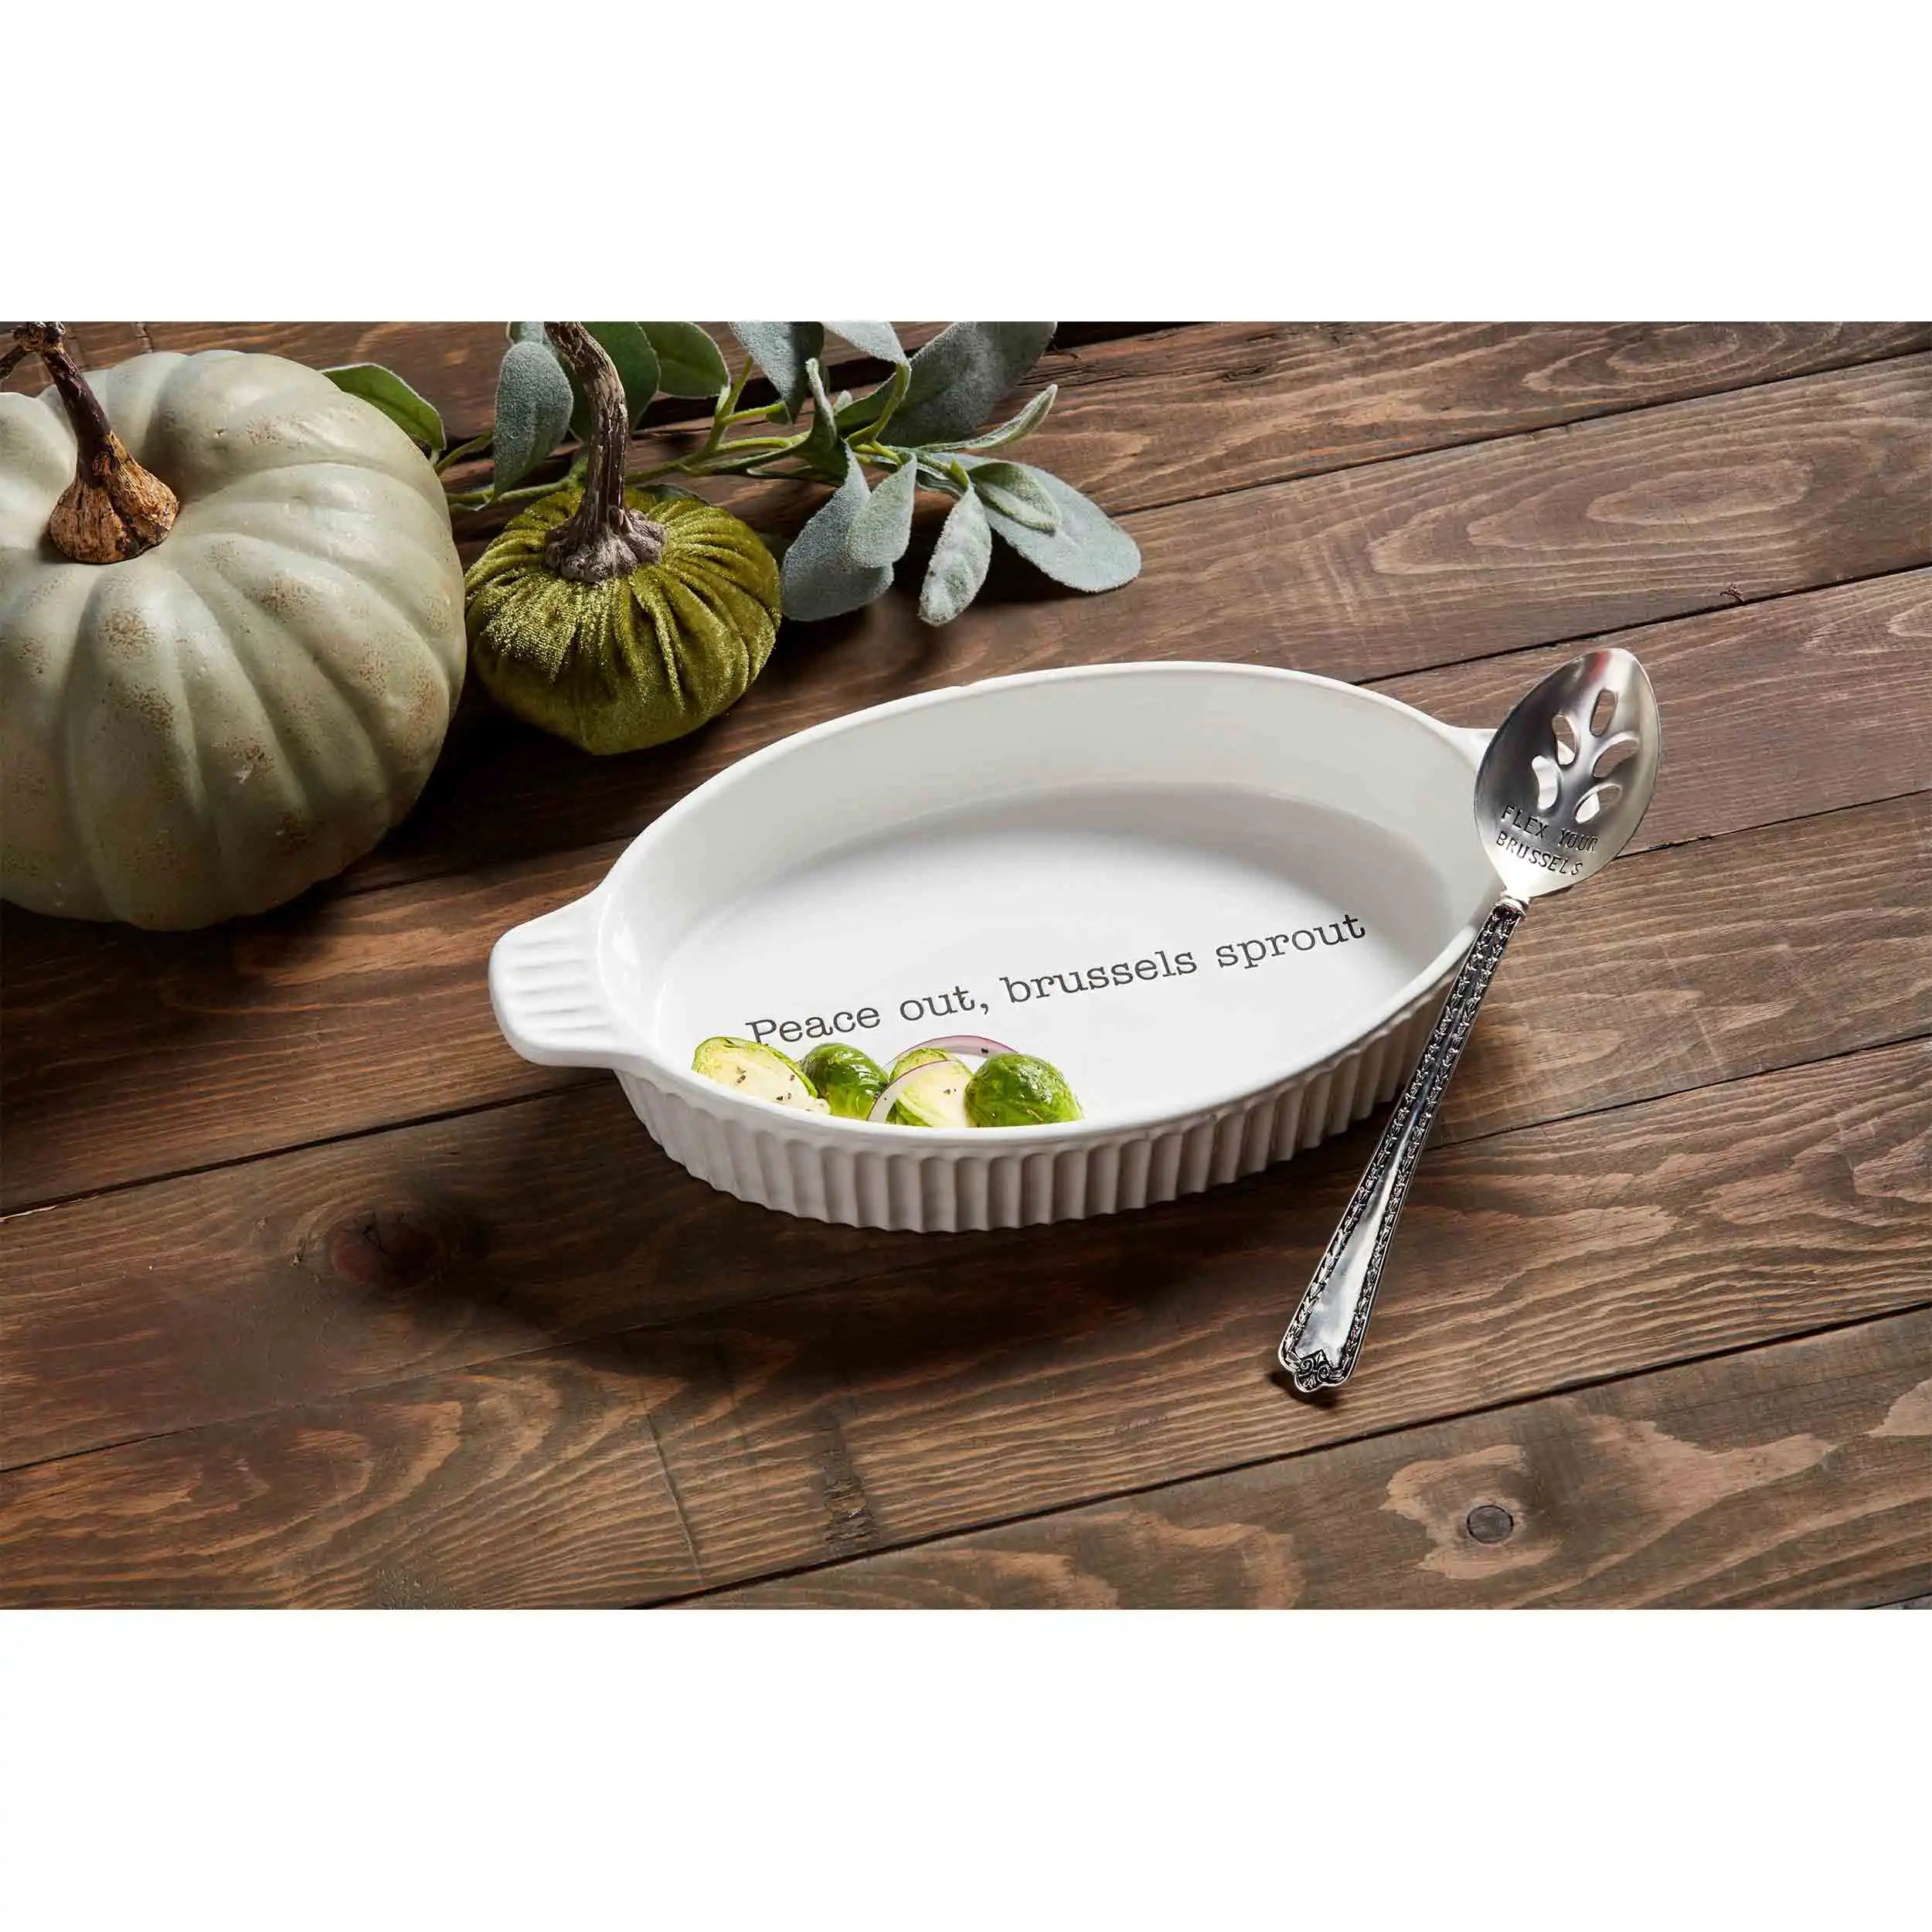 Brussel Sprouts Serving Dish Set